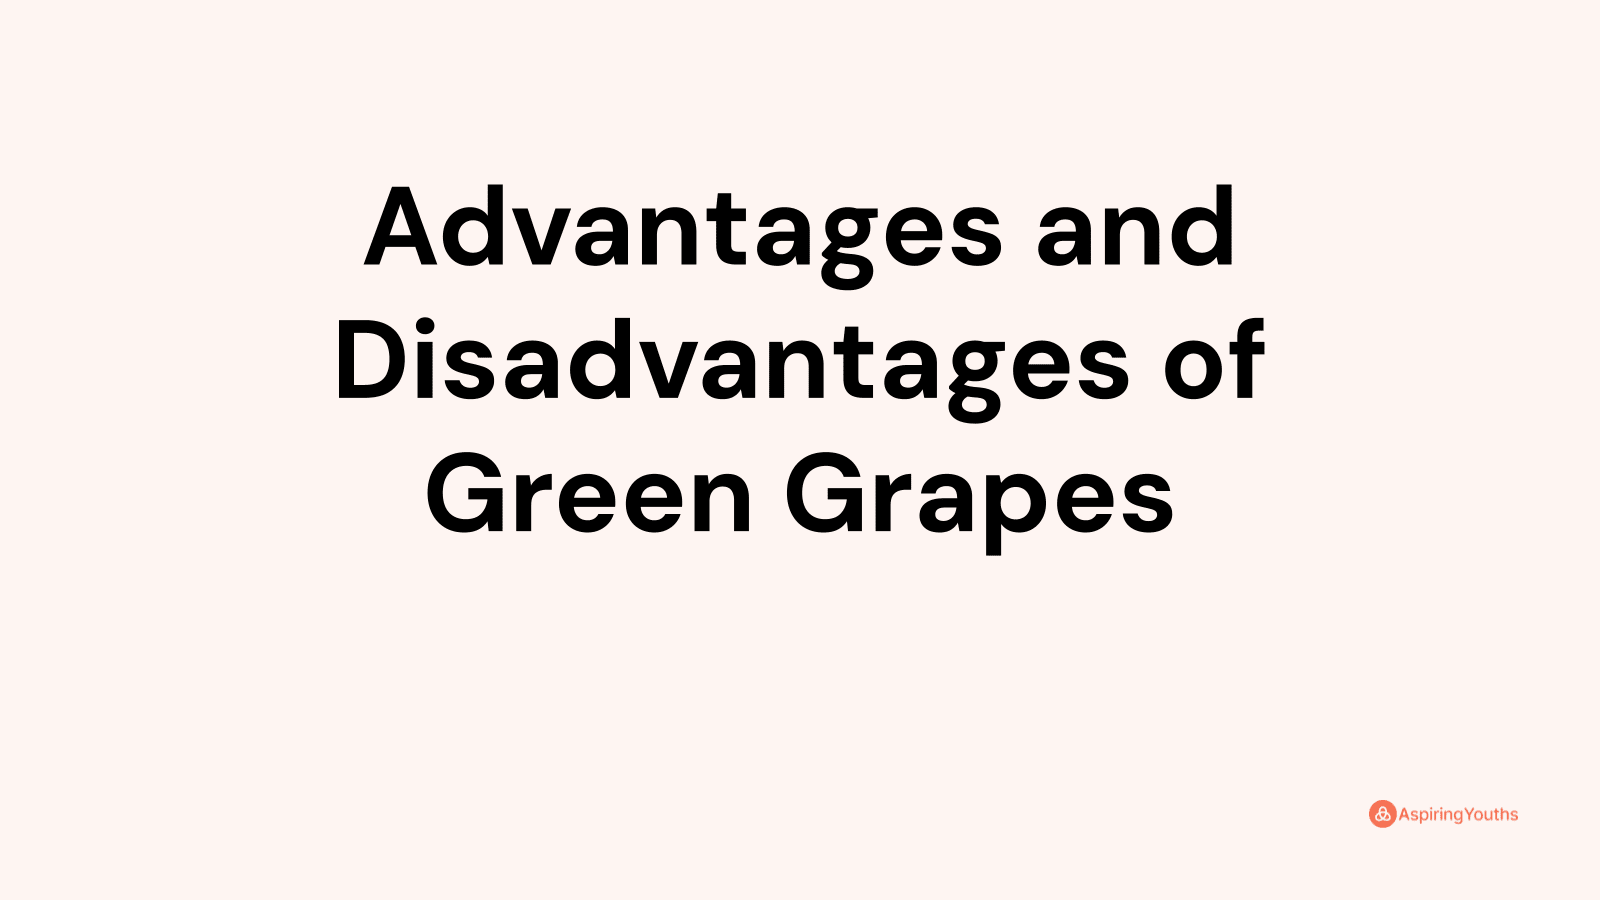 Advantages and Disadvantages of Green Grapes